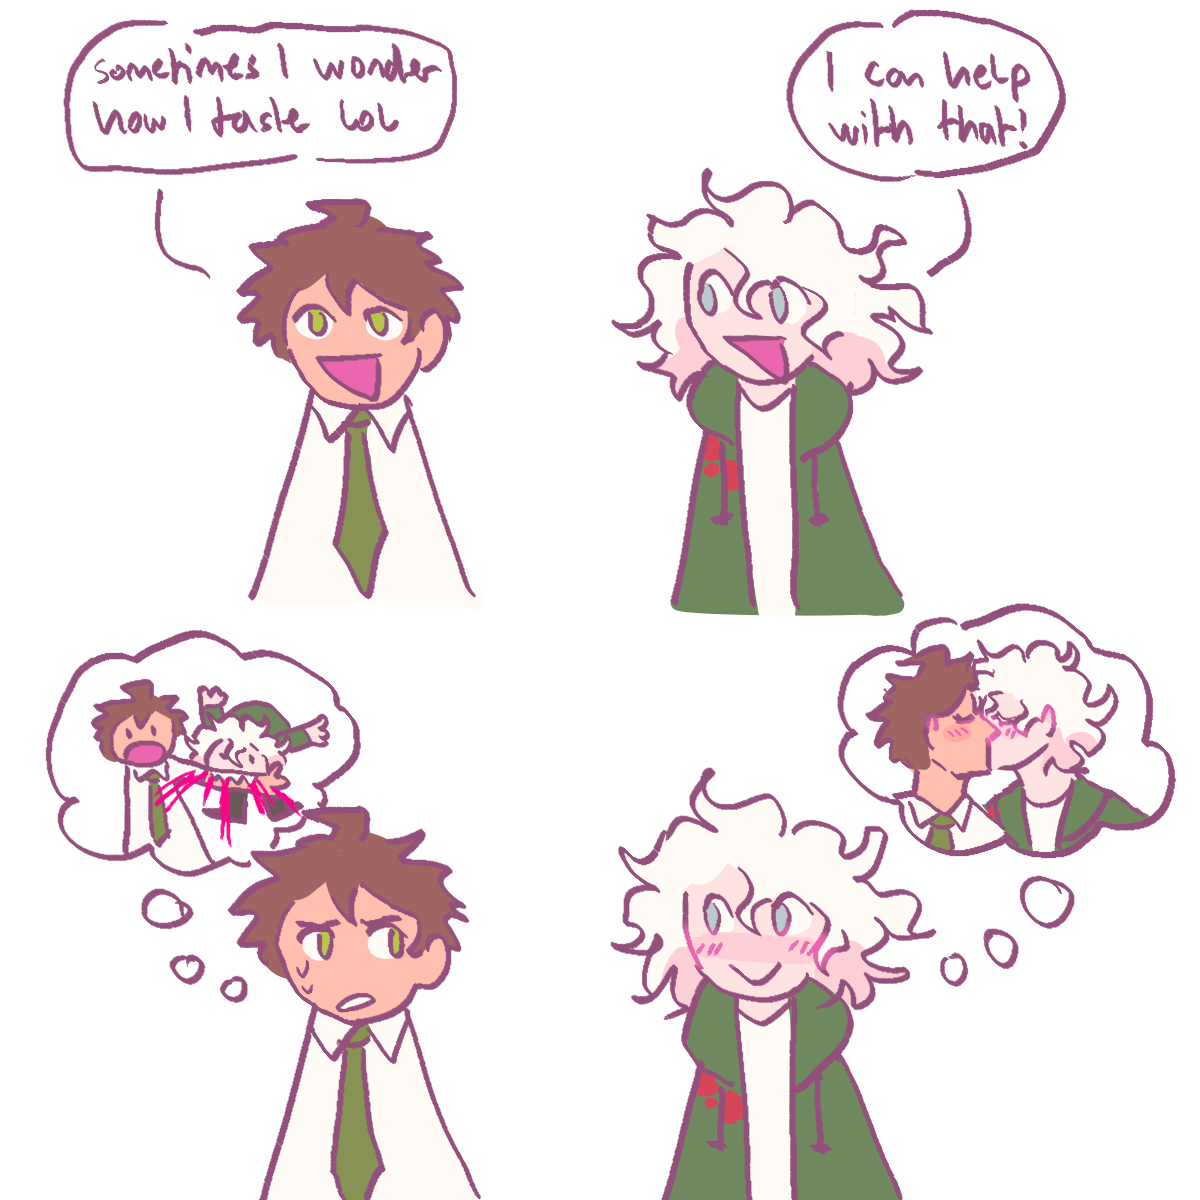 a meme redraw. hajime says 'sometimes I wonder what I taste like' and nagito responds 
		'I can help with that!'. hajime looks weirded out, thinking that nagito is talking about cannibalism. nagito is
		actually thinking about kissing him.